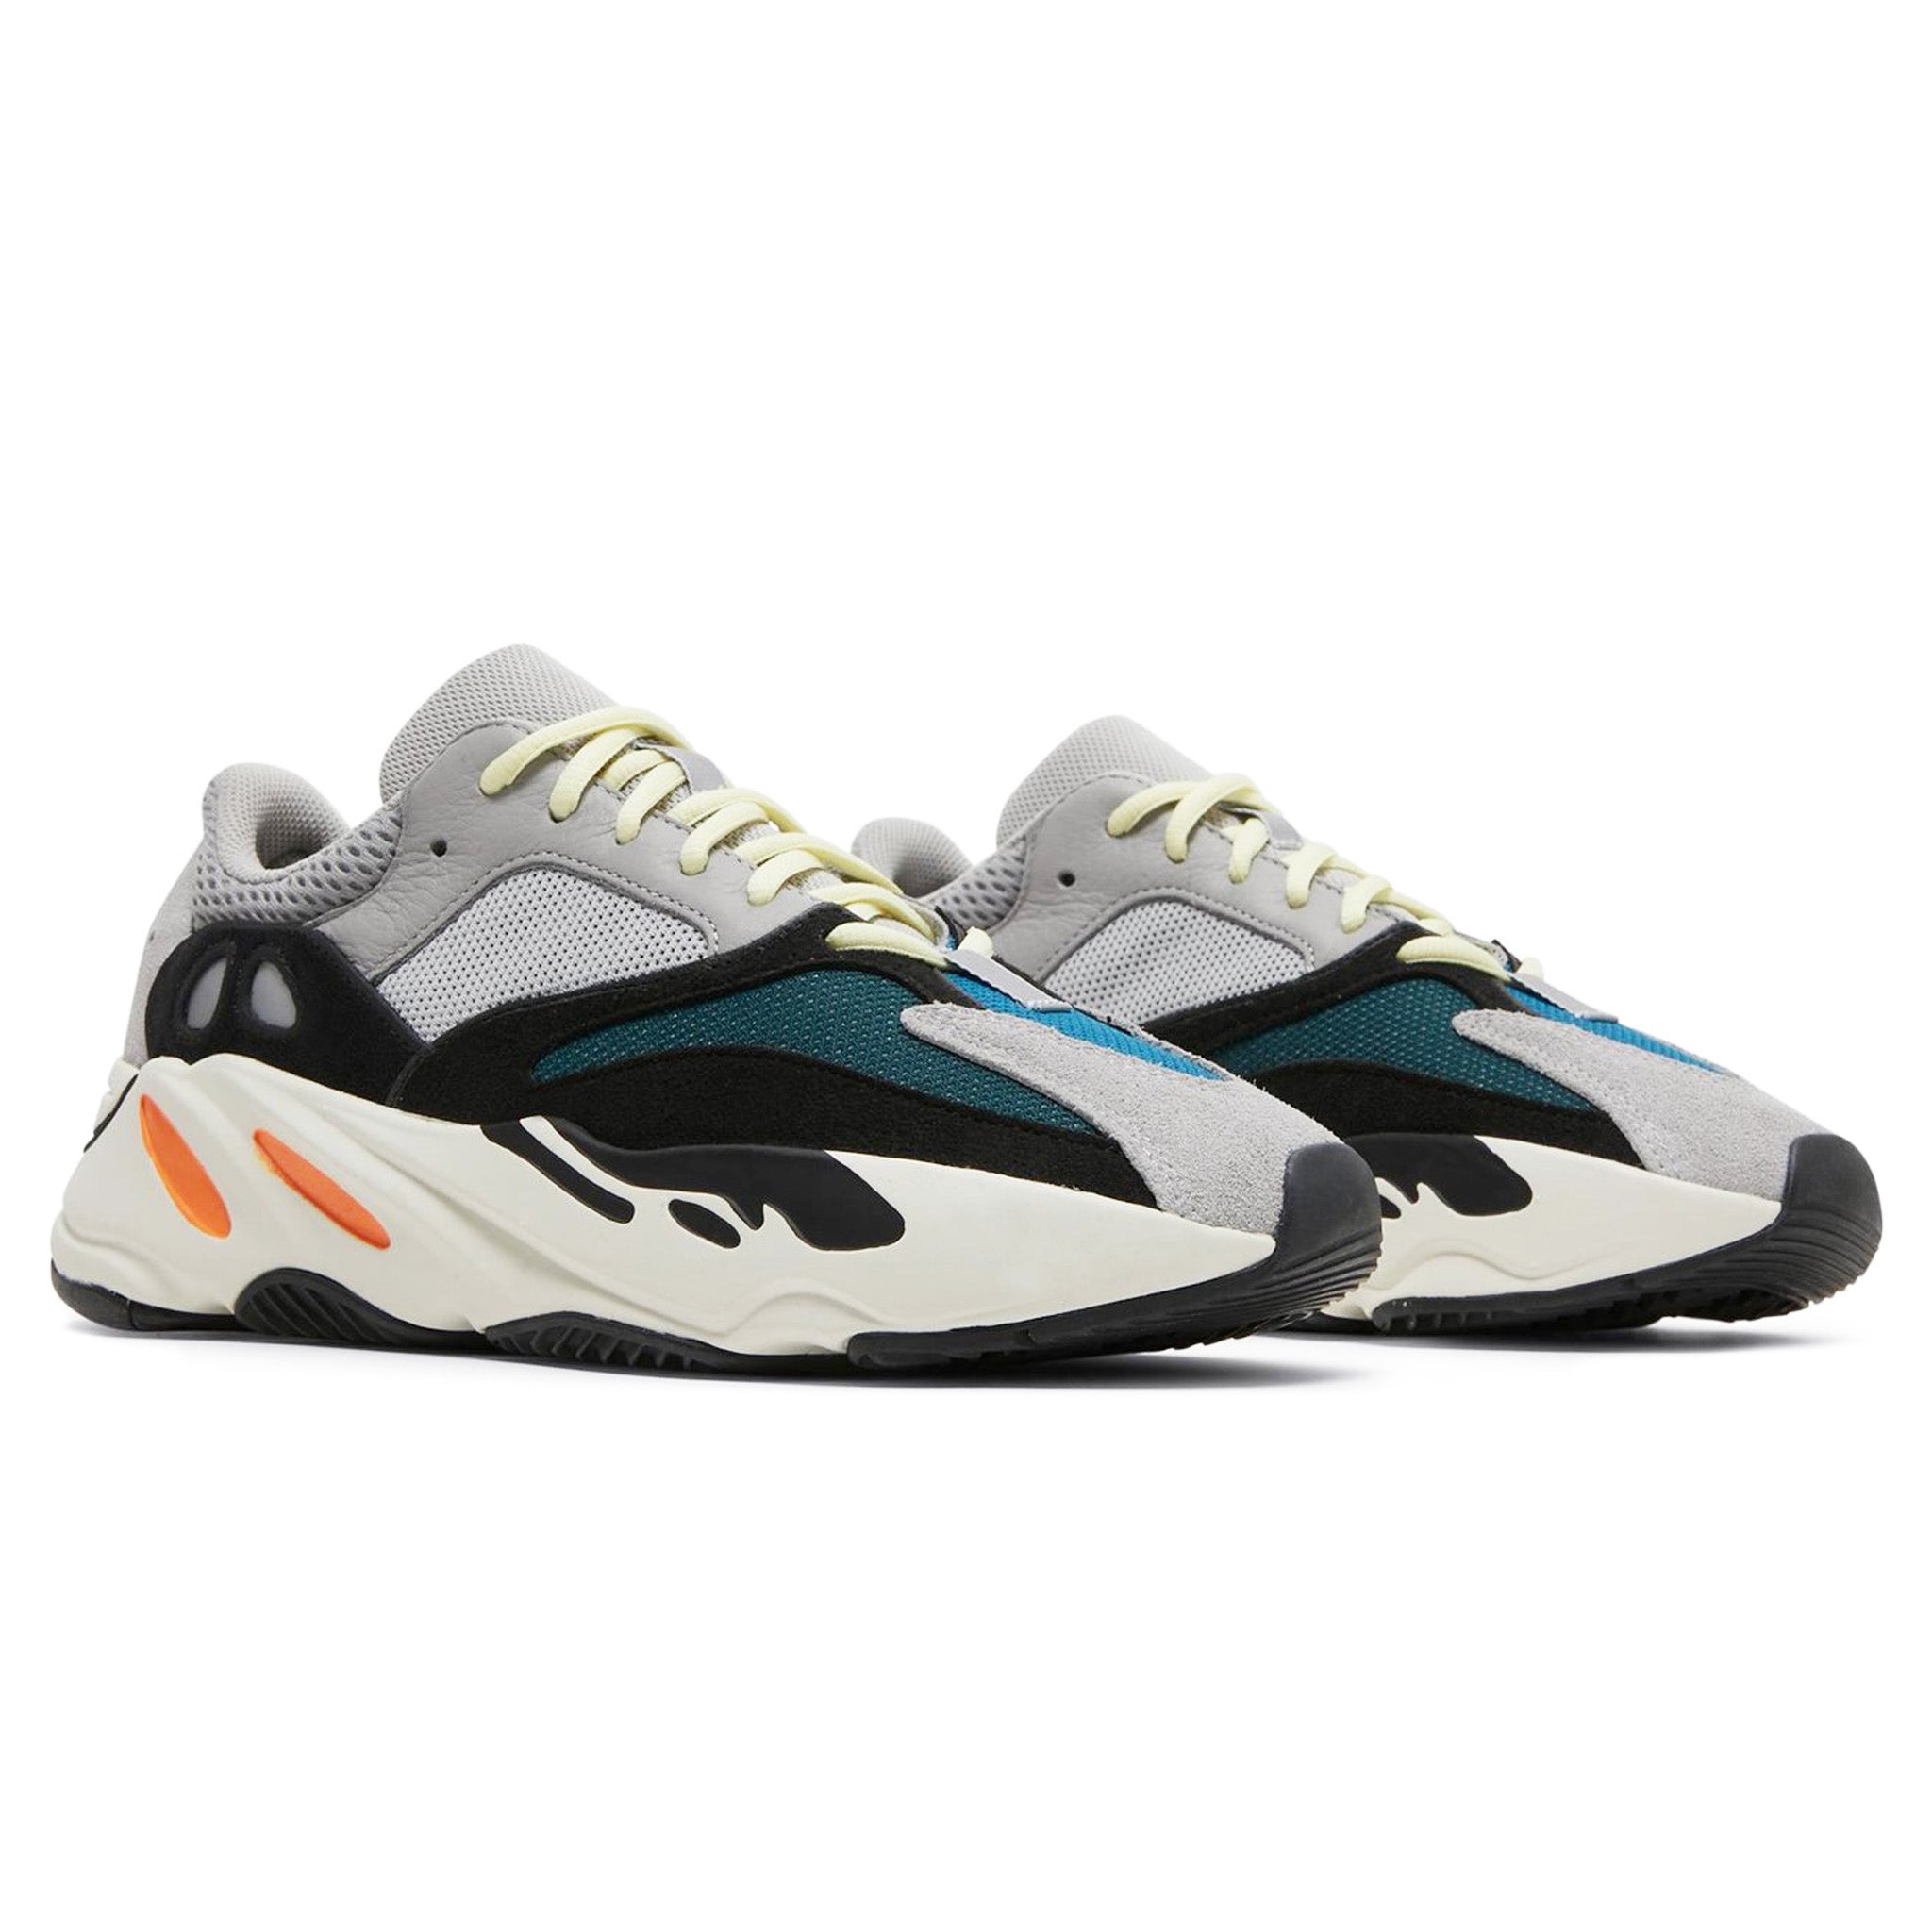 Image of Adidas Yeezy 700 Boost Wave Runner